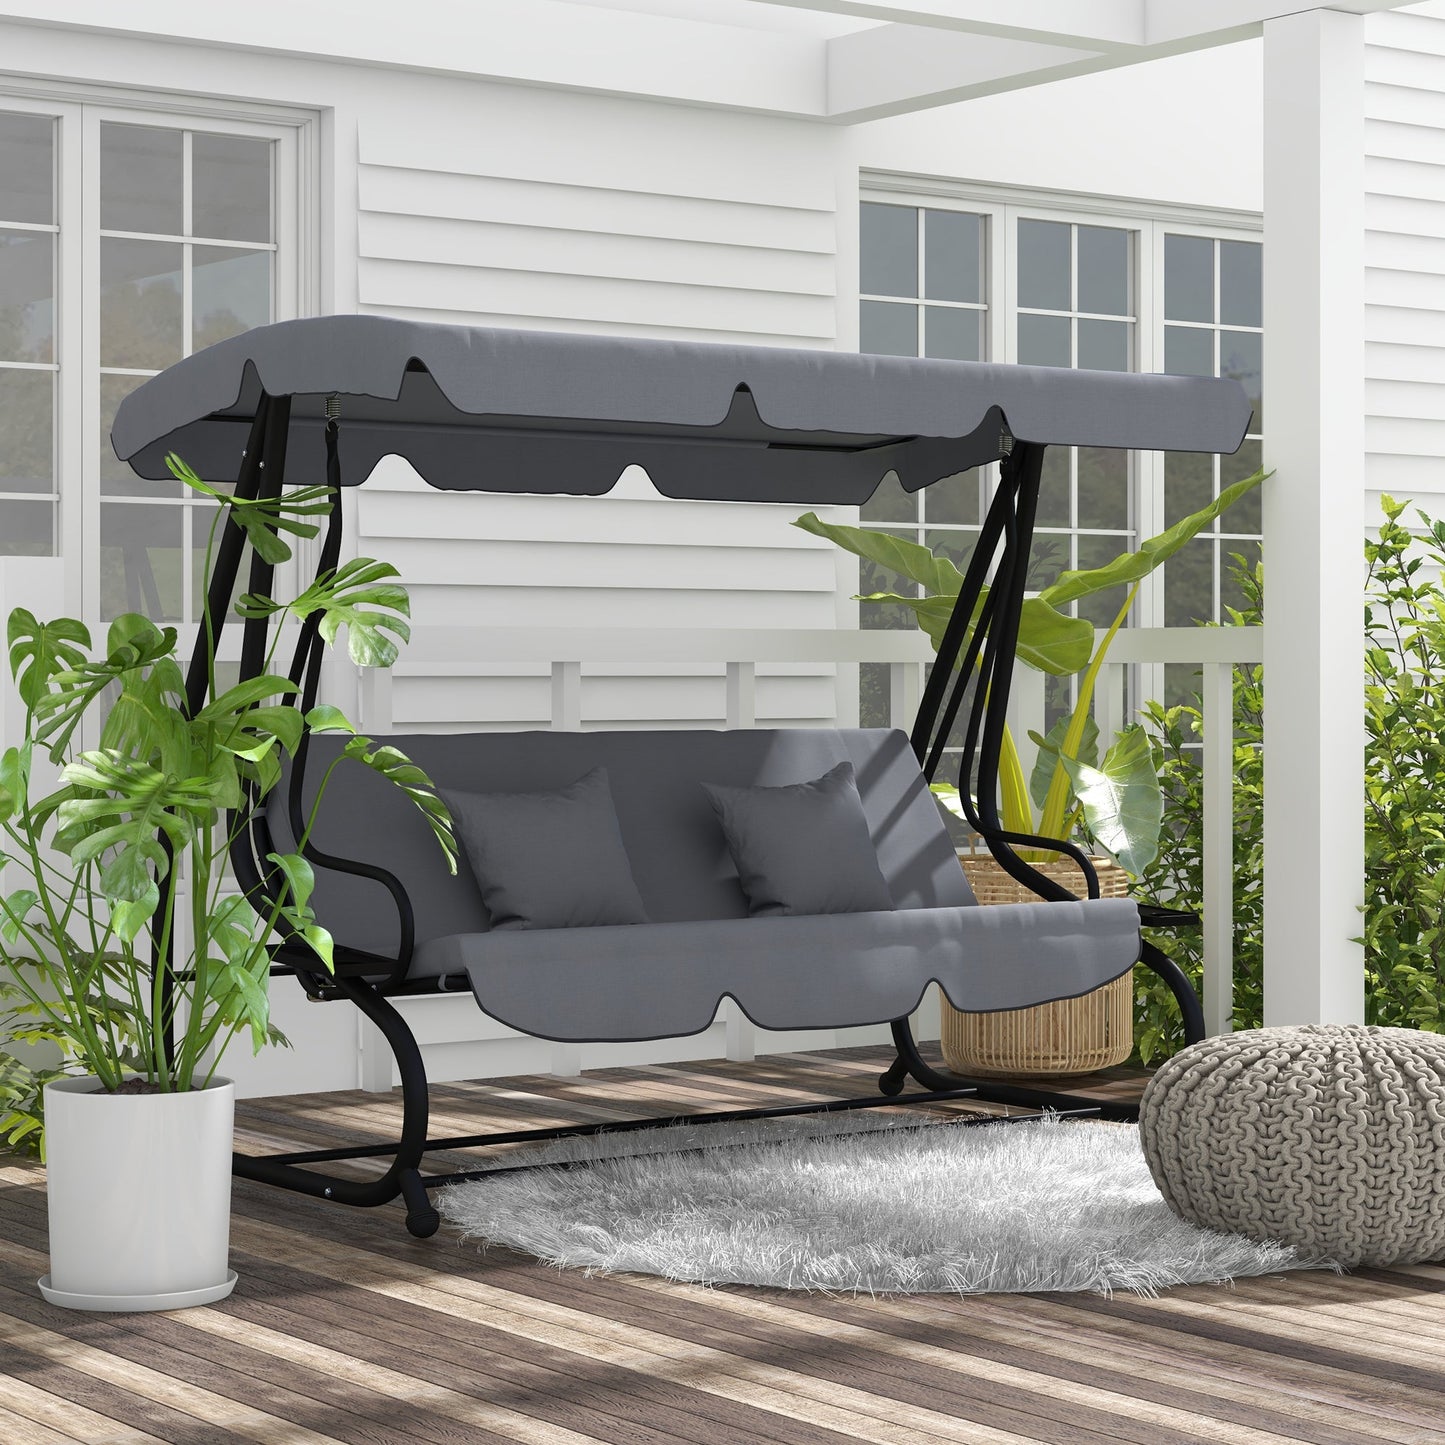 -Outsunny Free Standing Swing Bench, Porch Swing with Stand, Adjustable Canopy, Cushion and Pillows - Outdoor Style Company